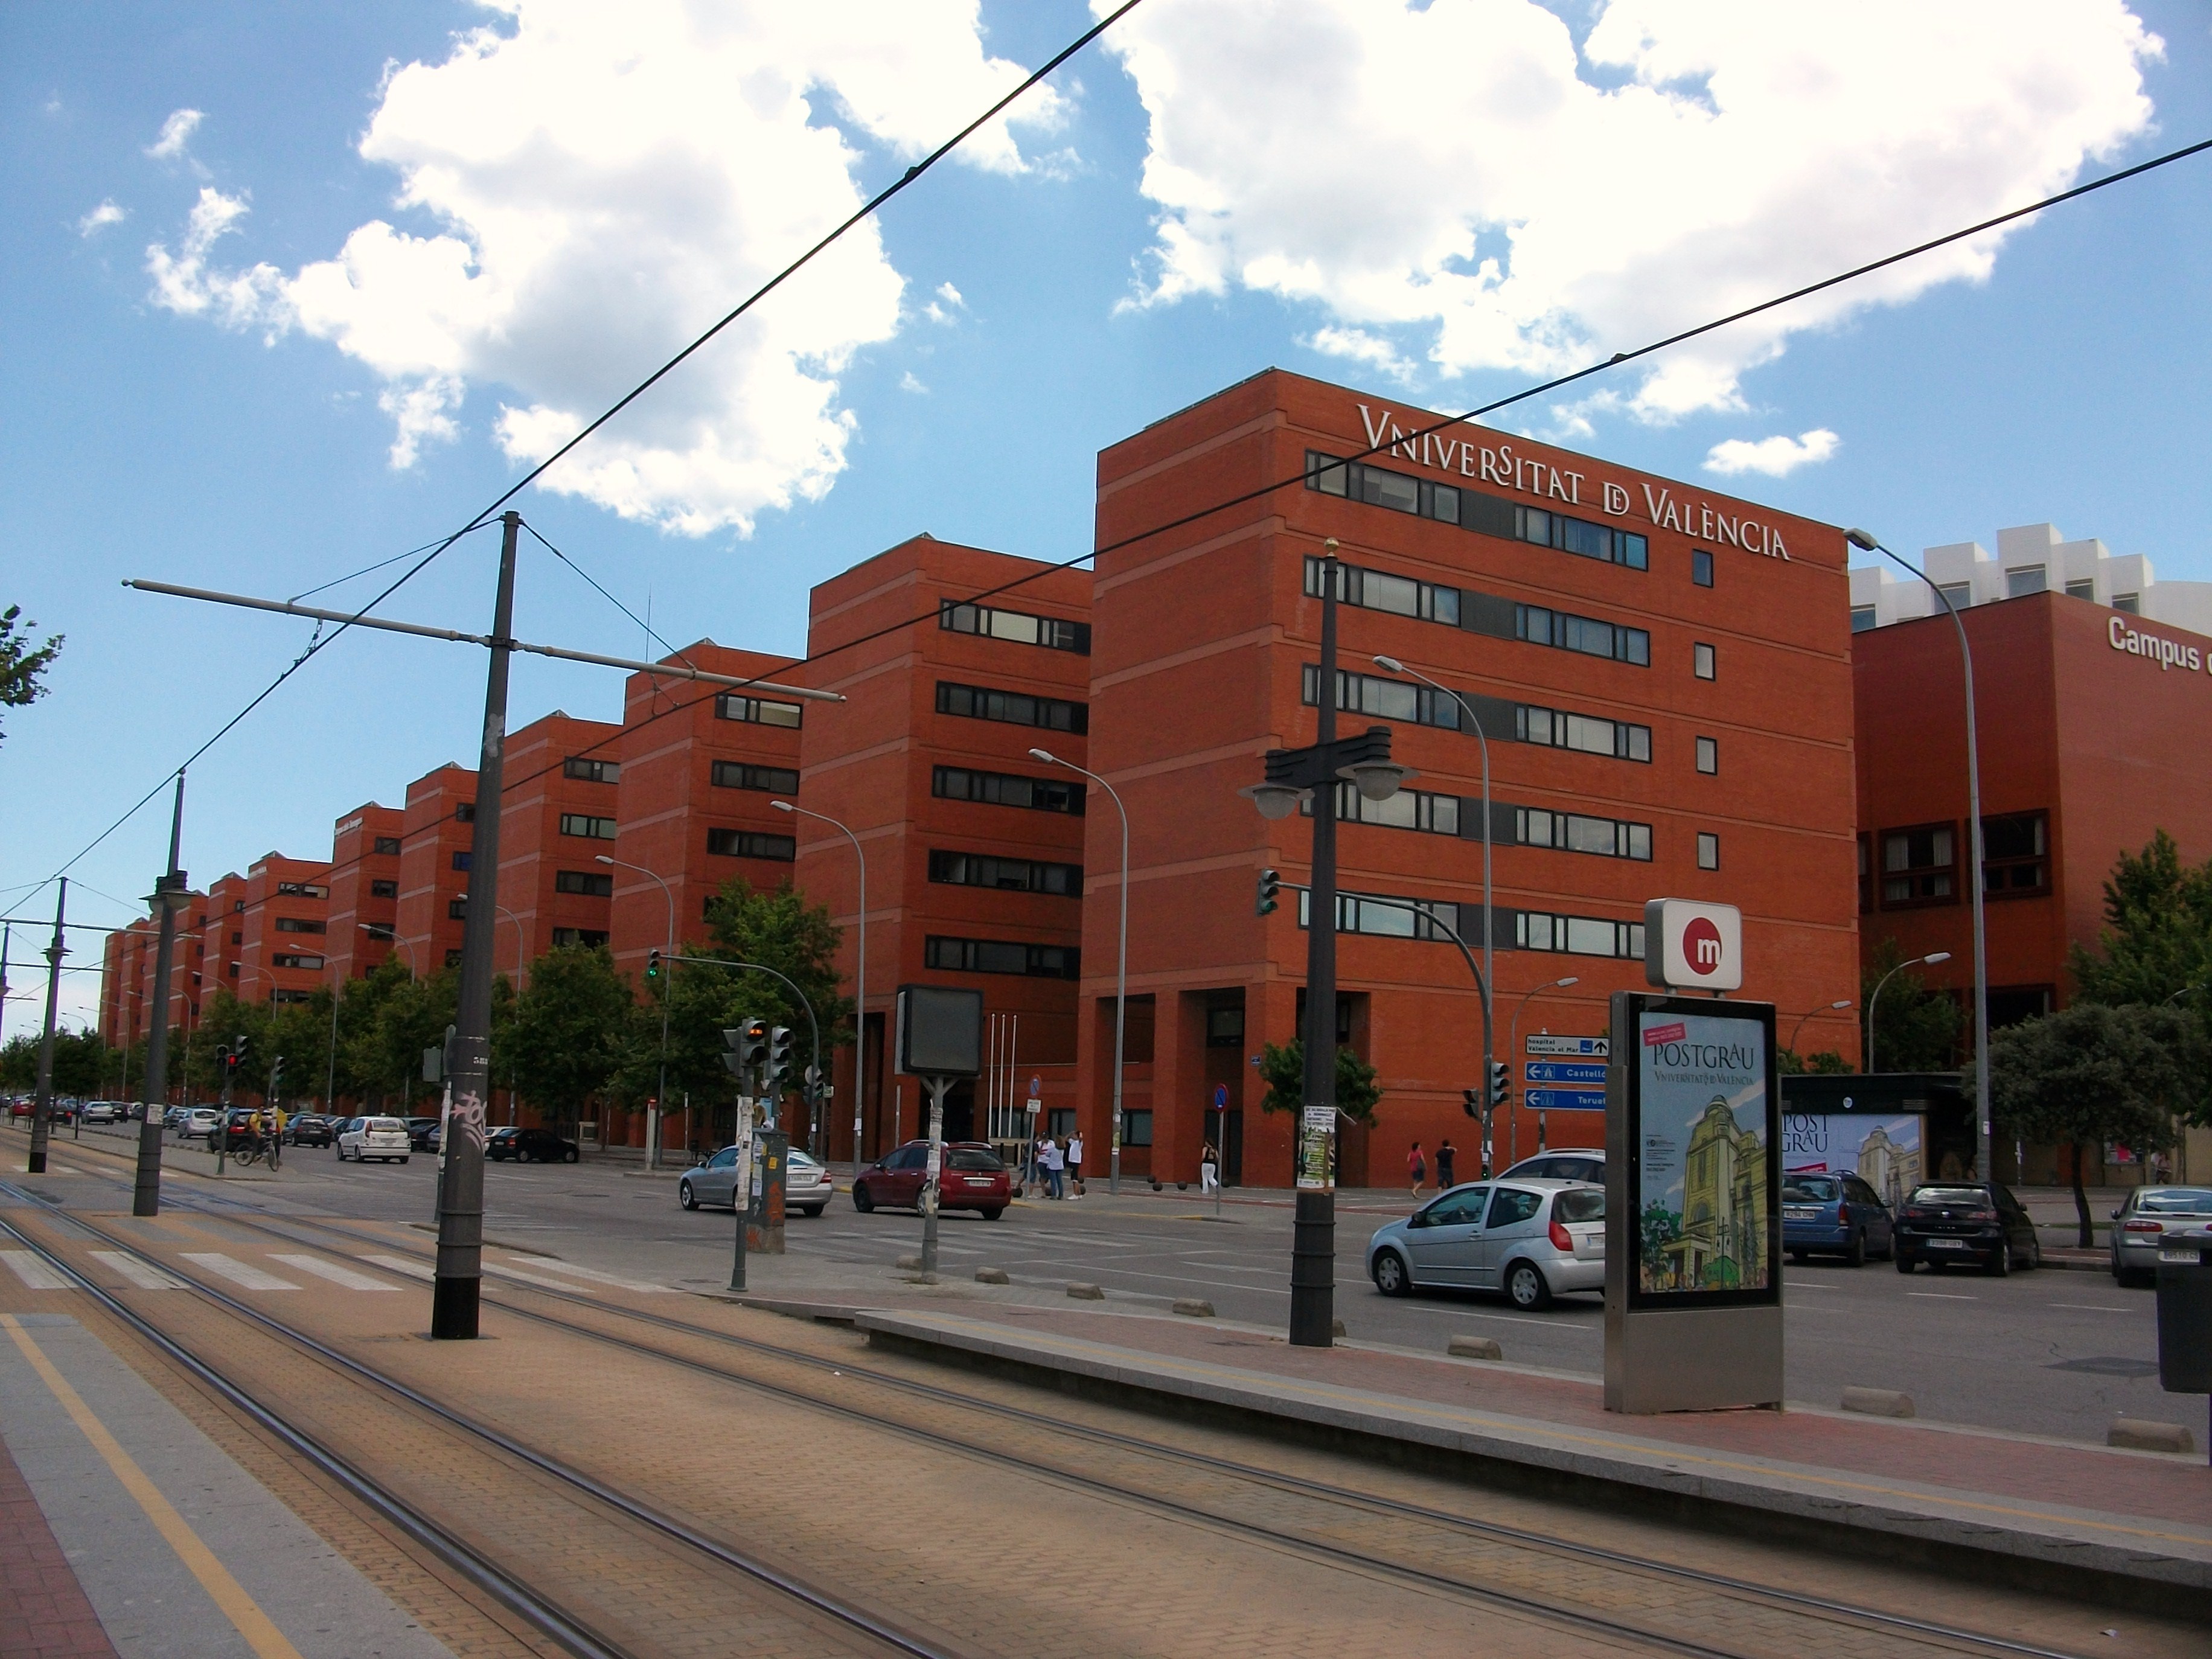 Information system for the Strategic Plan of the University of Valencia